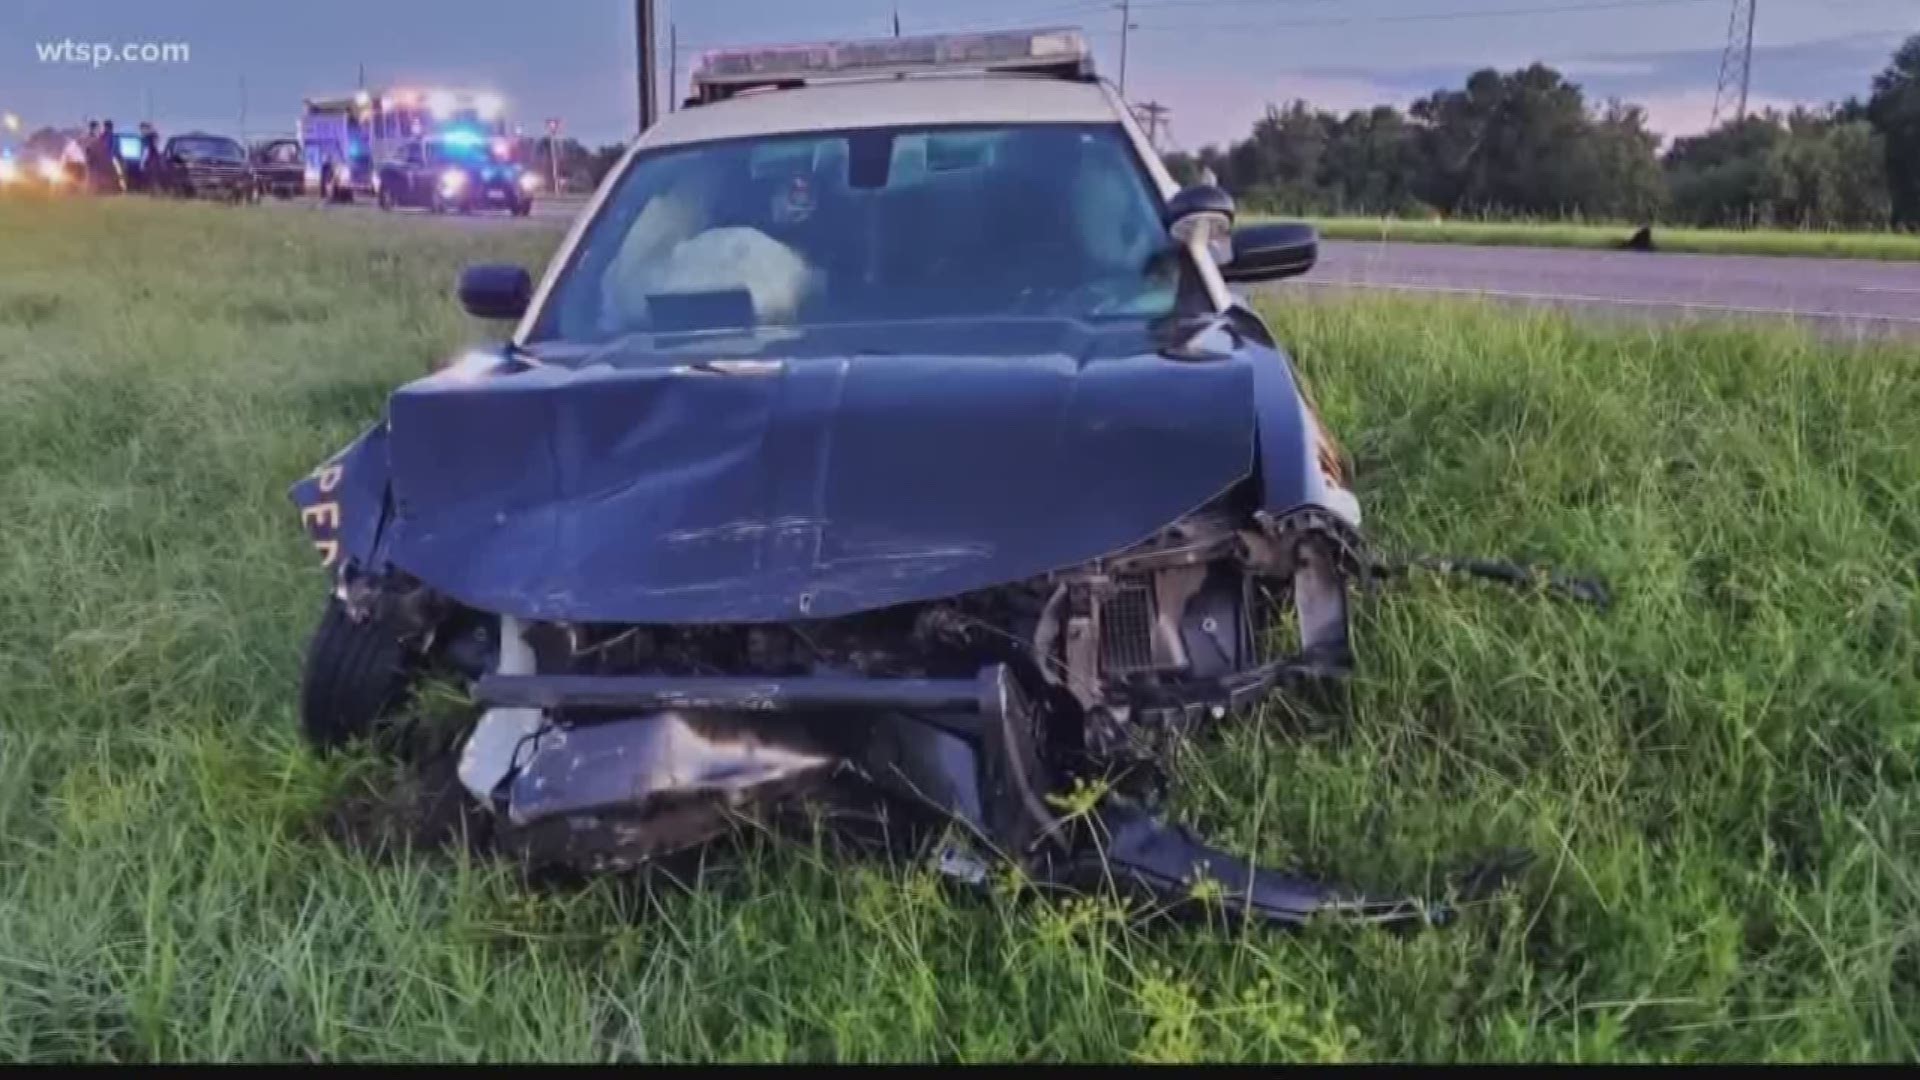 Two people were seriously hurt and a Florida trooper suffered only minor injuries in a three-vehicle crash early Sunday morning.

It happened just after 6 a.m. on State Road 674 just west of Interstate 75, according to the Florida Highway Patrol.